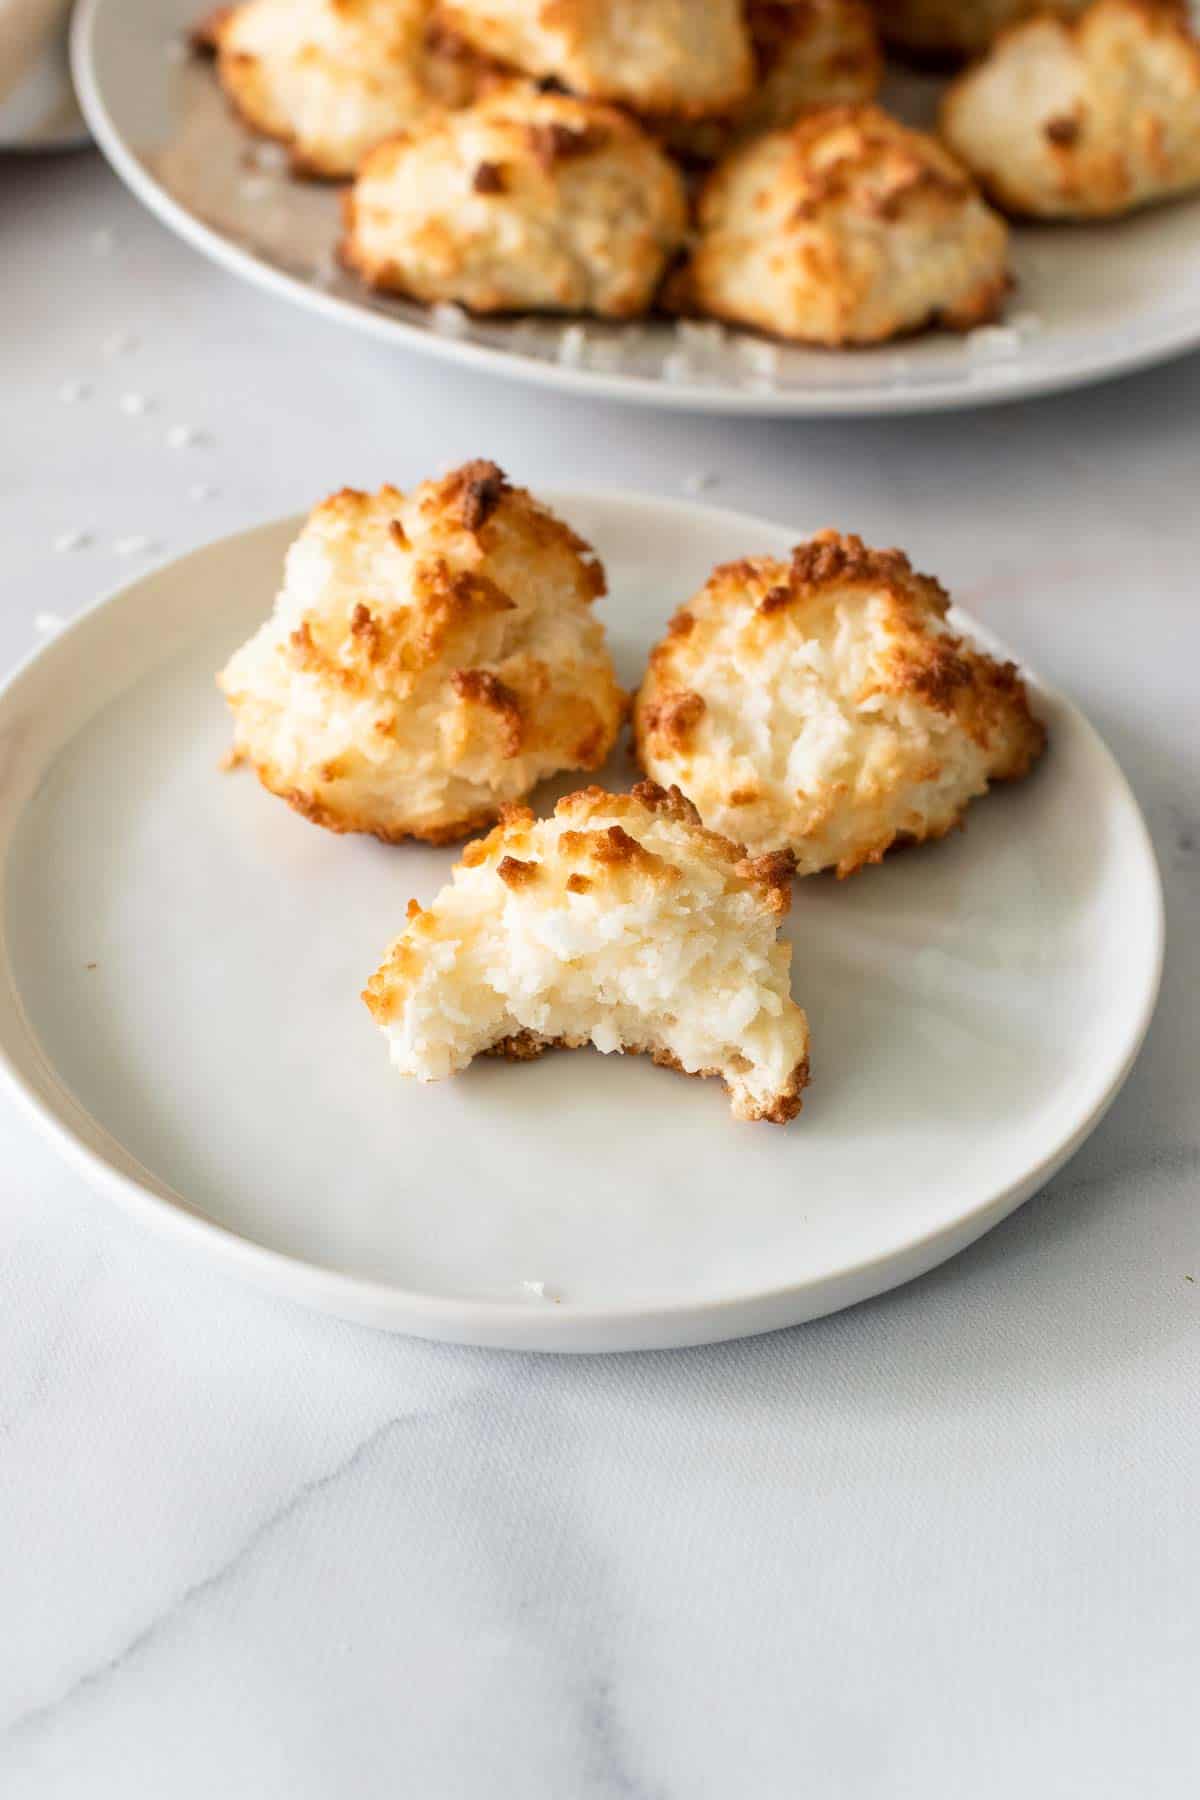 Three macaroons on a white plate with a bite taken out of one